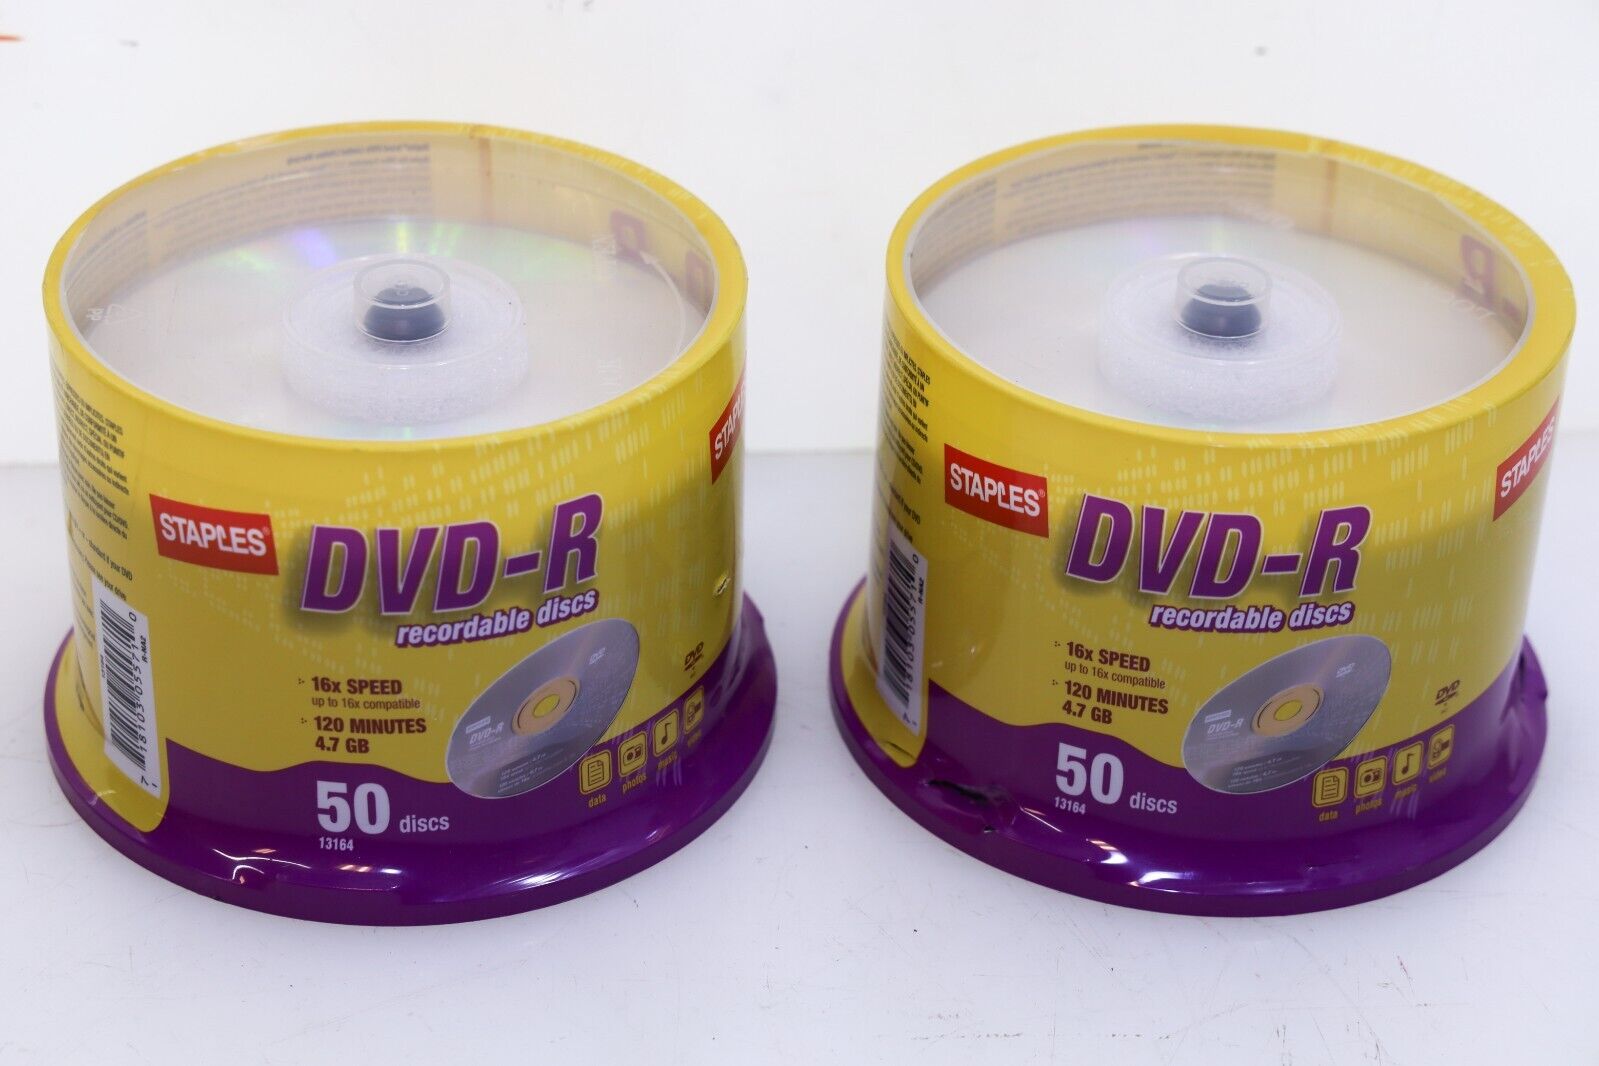 Quantity of 100 (2 Spindles of 50) STAPLES Branded DVD-R 16x 120 Minutes 4.7GB